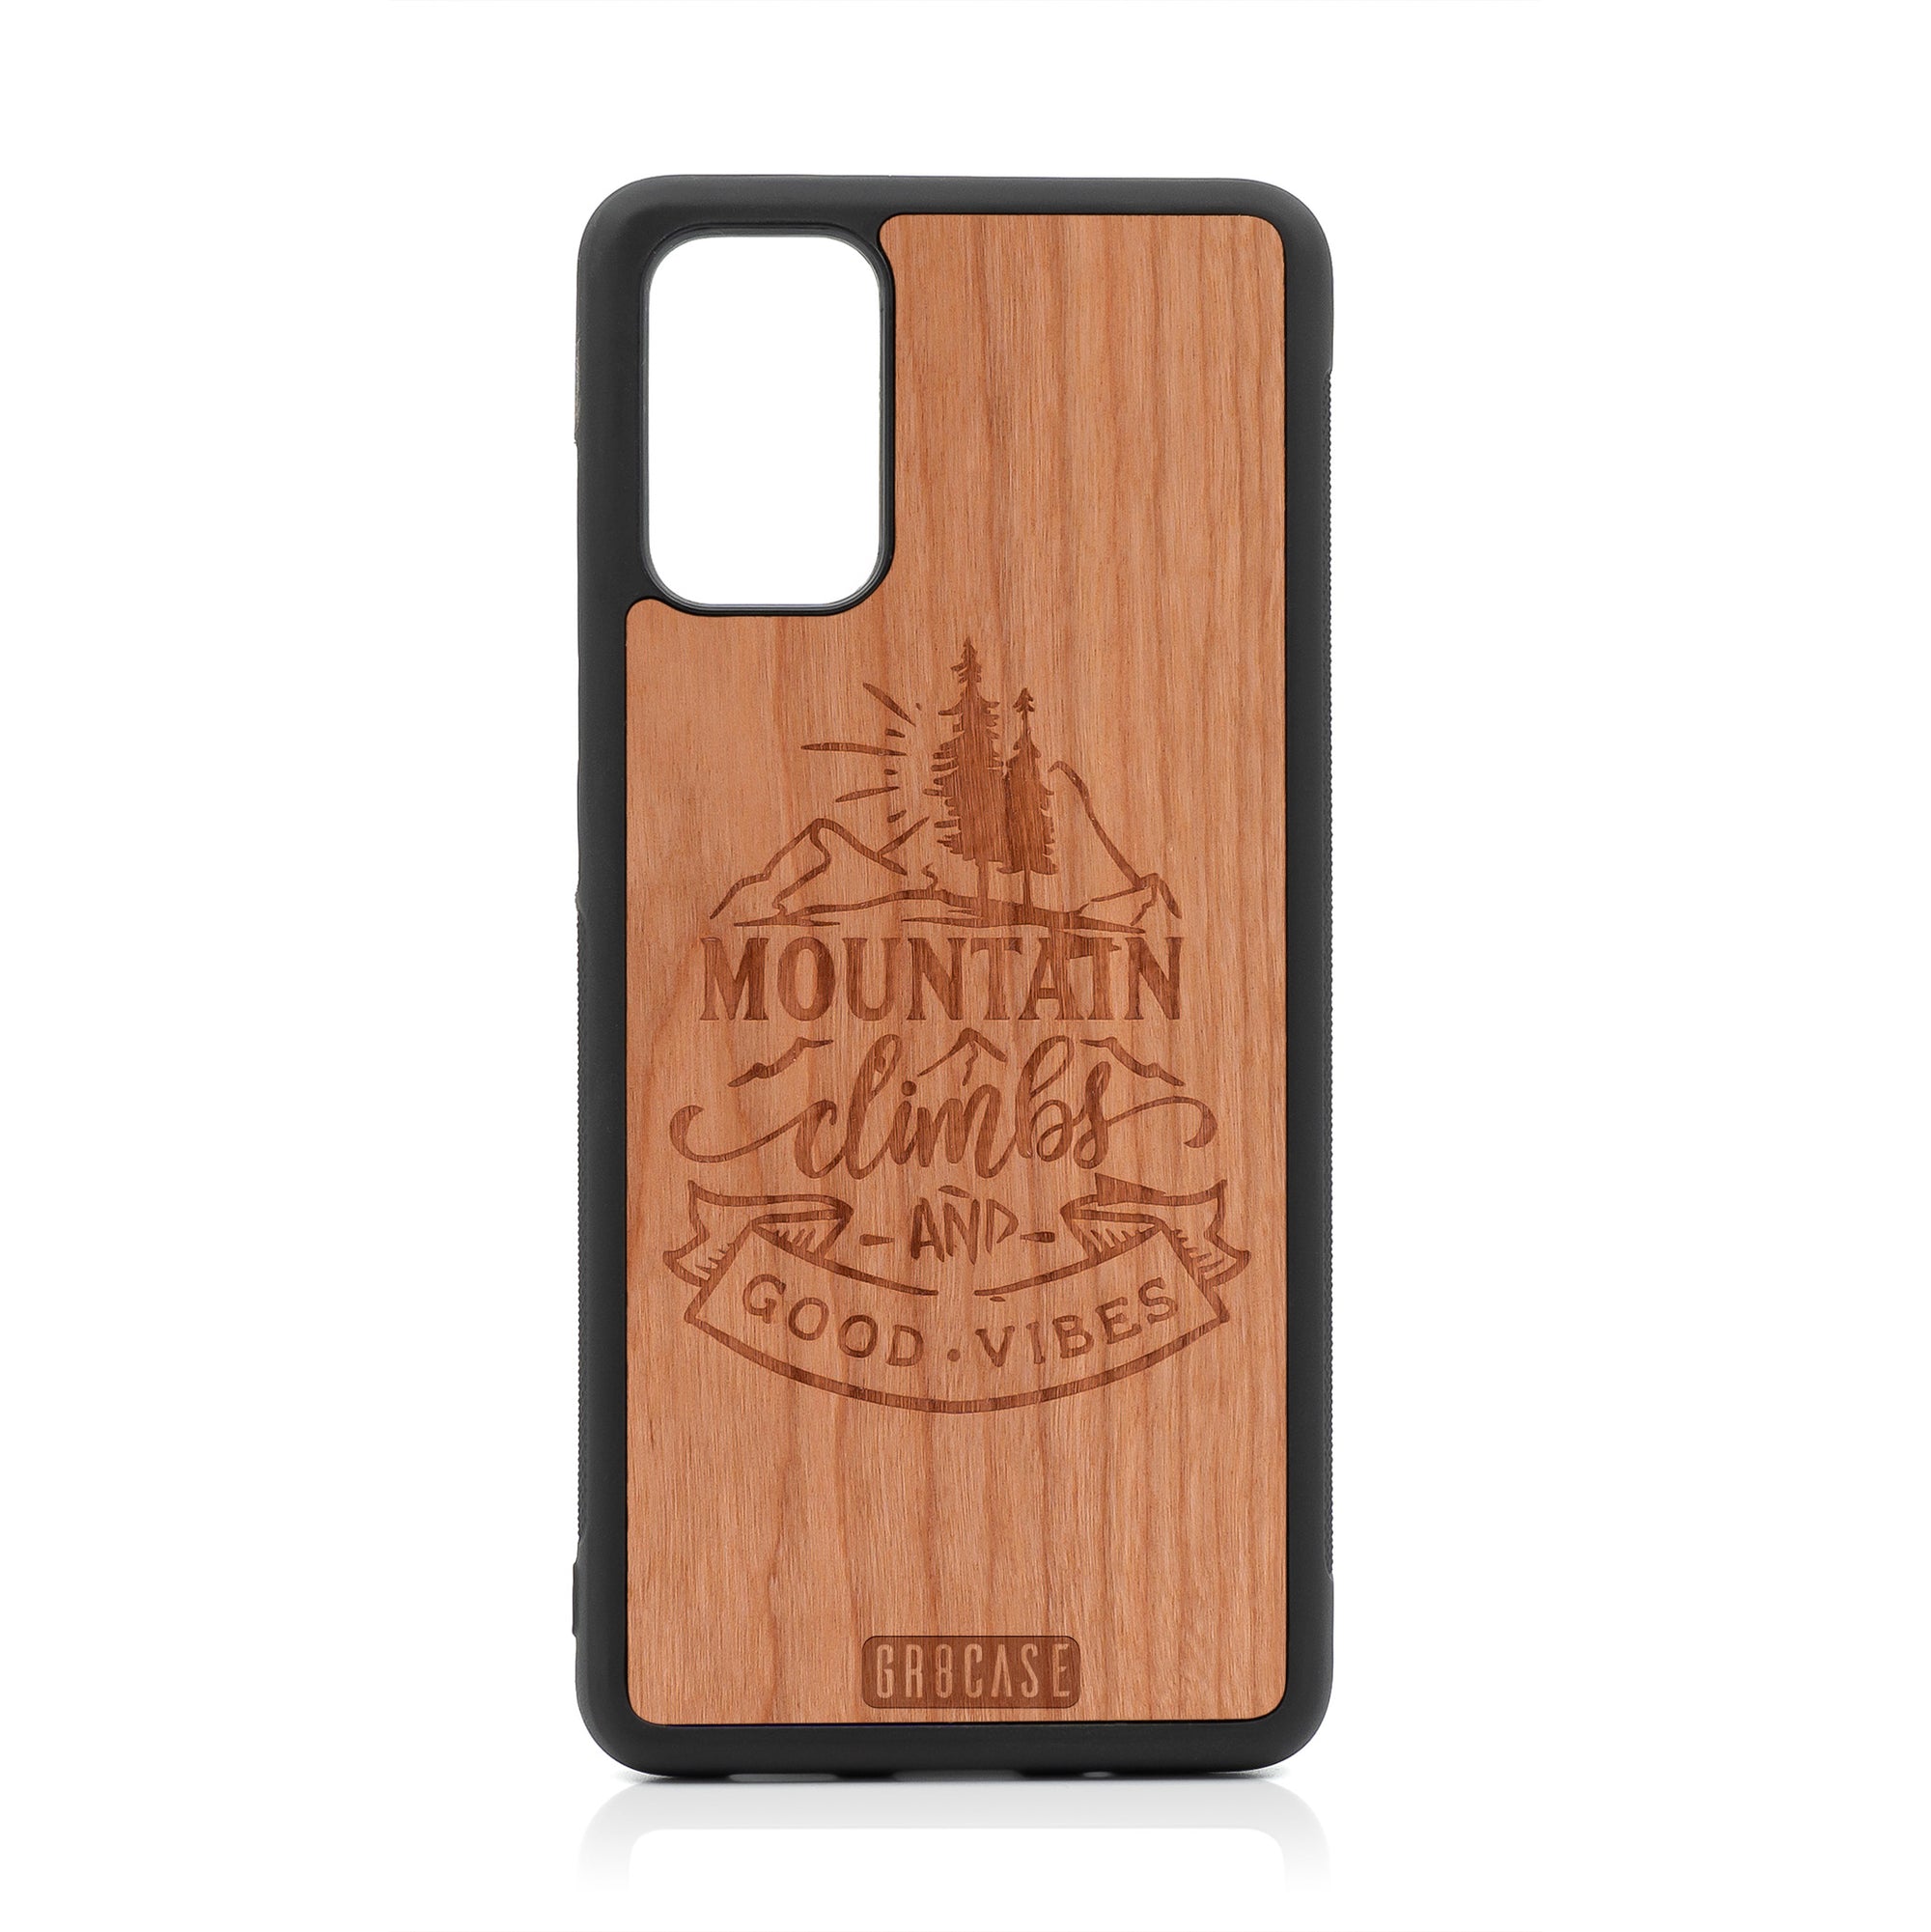 Mountain Climbs And Good Vibes Design Wood Case For Samsung Galaxy S20 Plus by GR8CASE